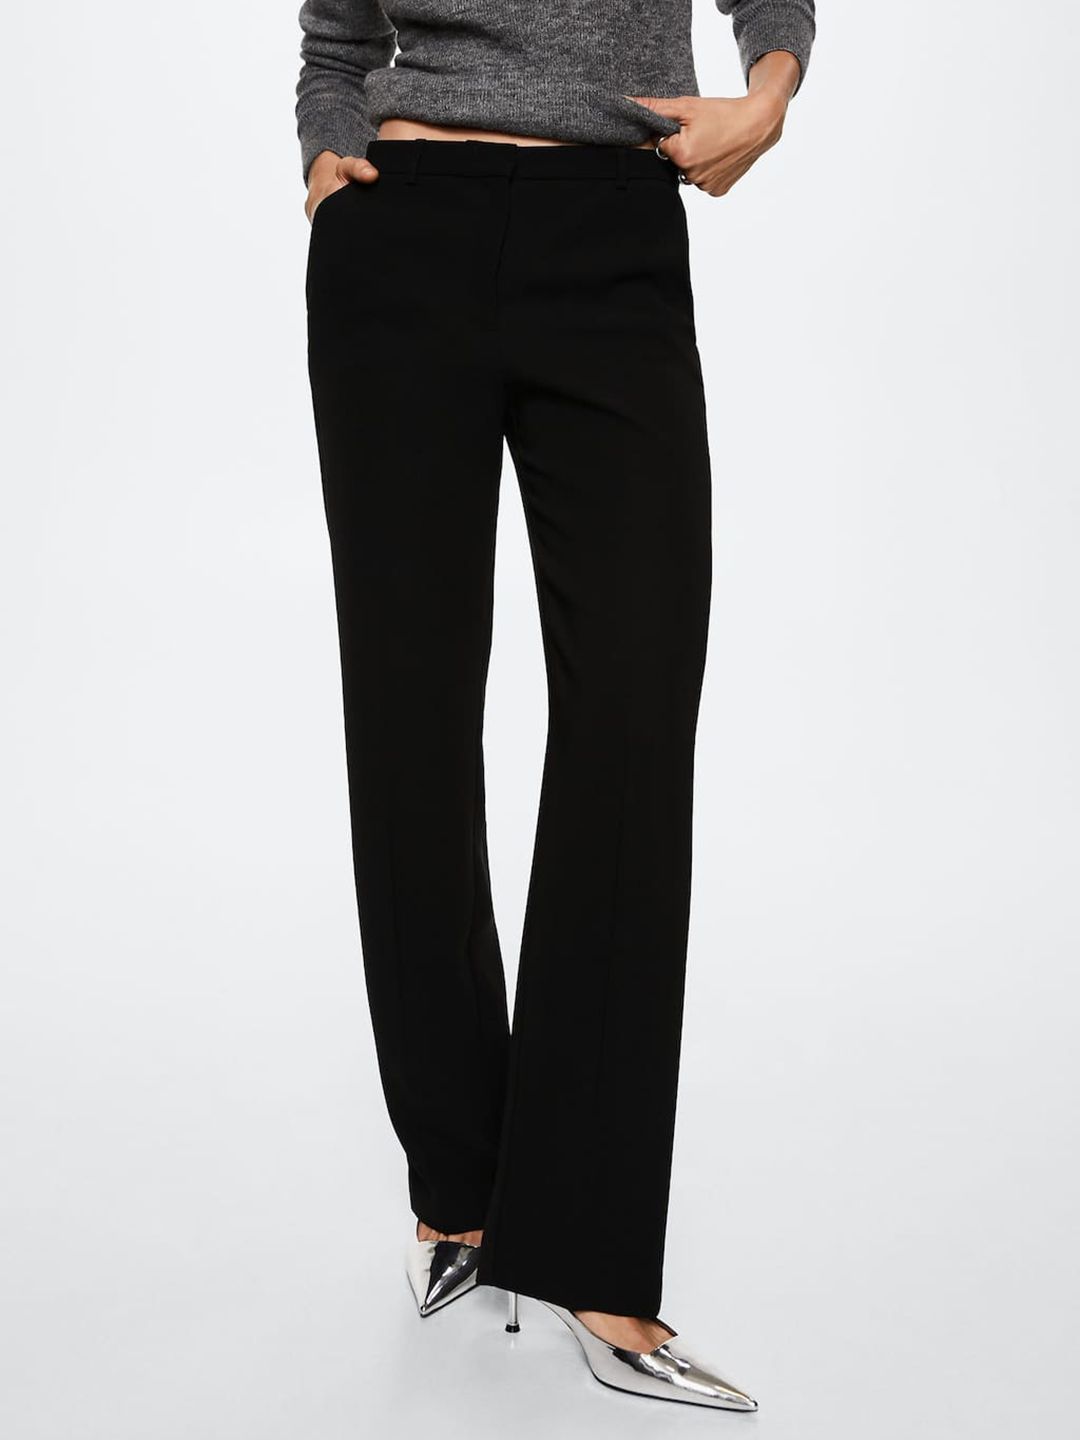 MANGO Women Black Straight Fit Sustainable Trousers Price in India